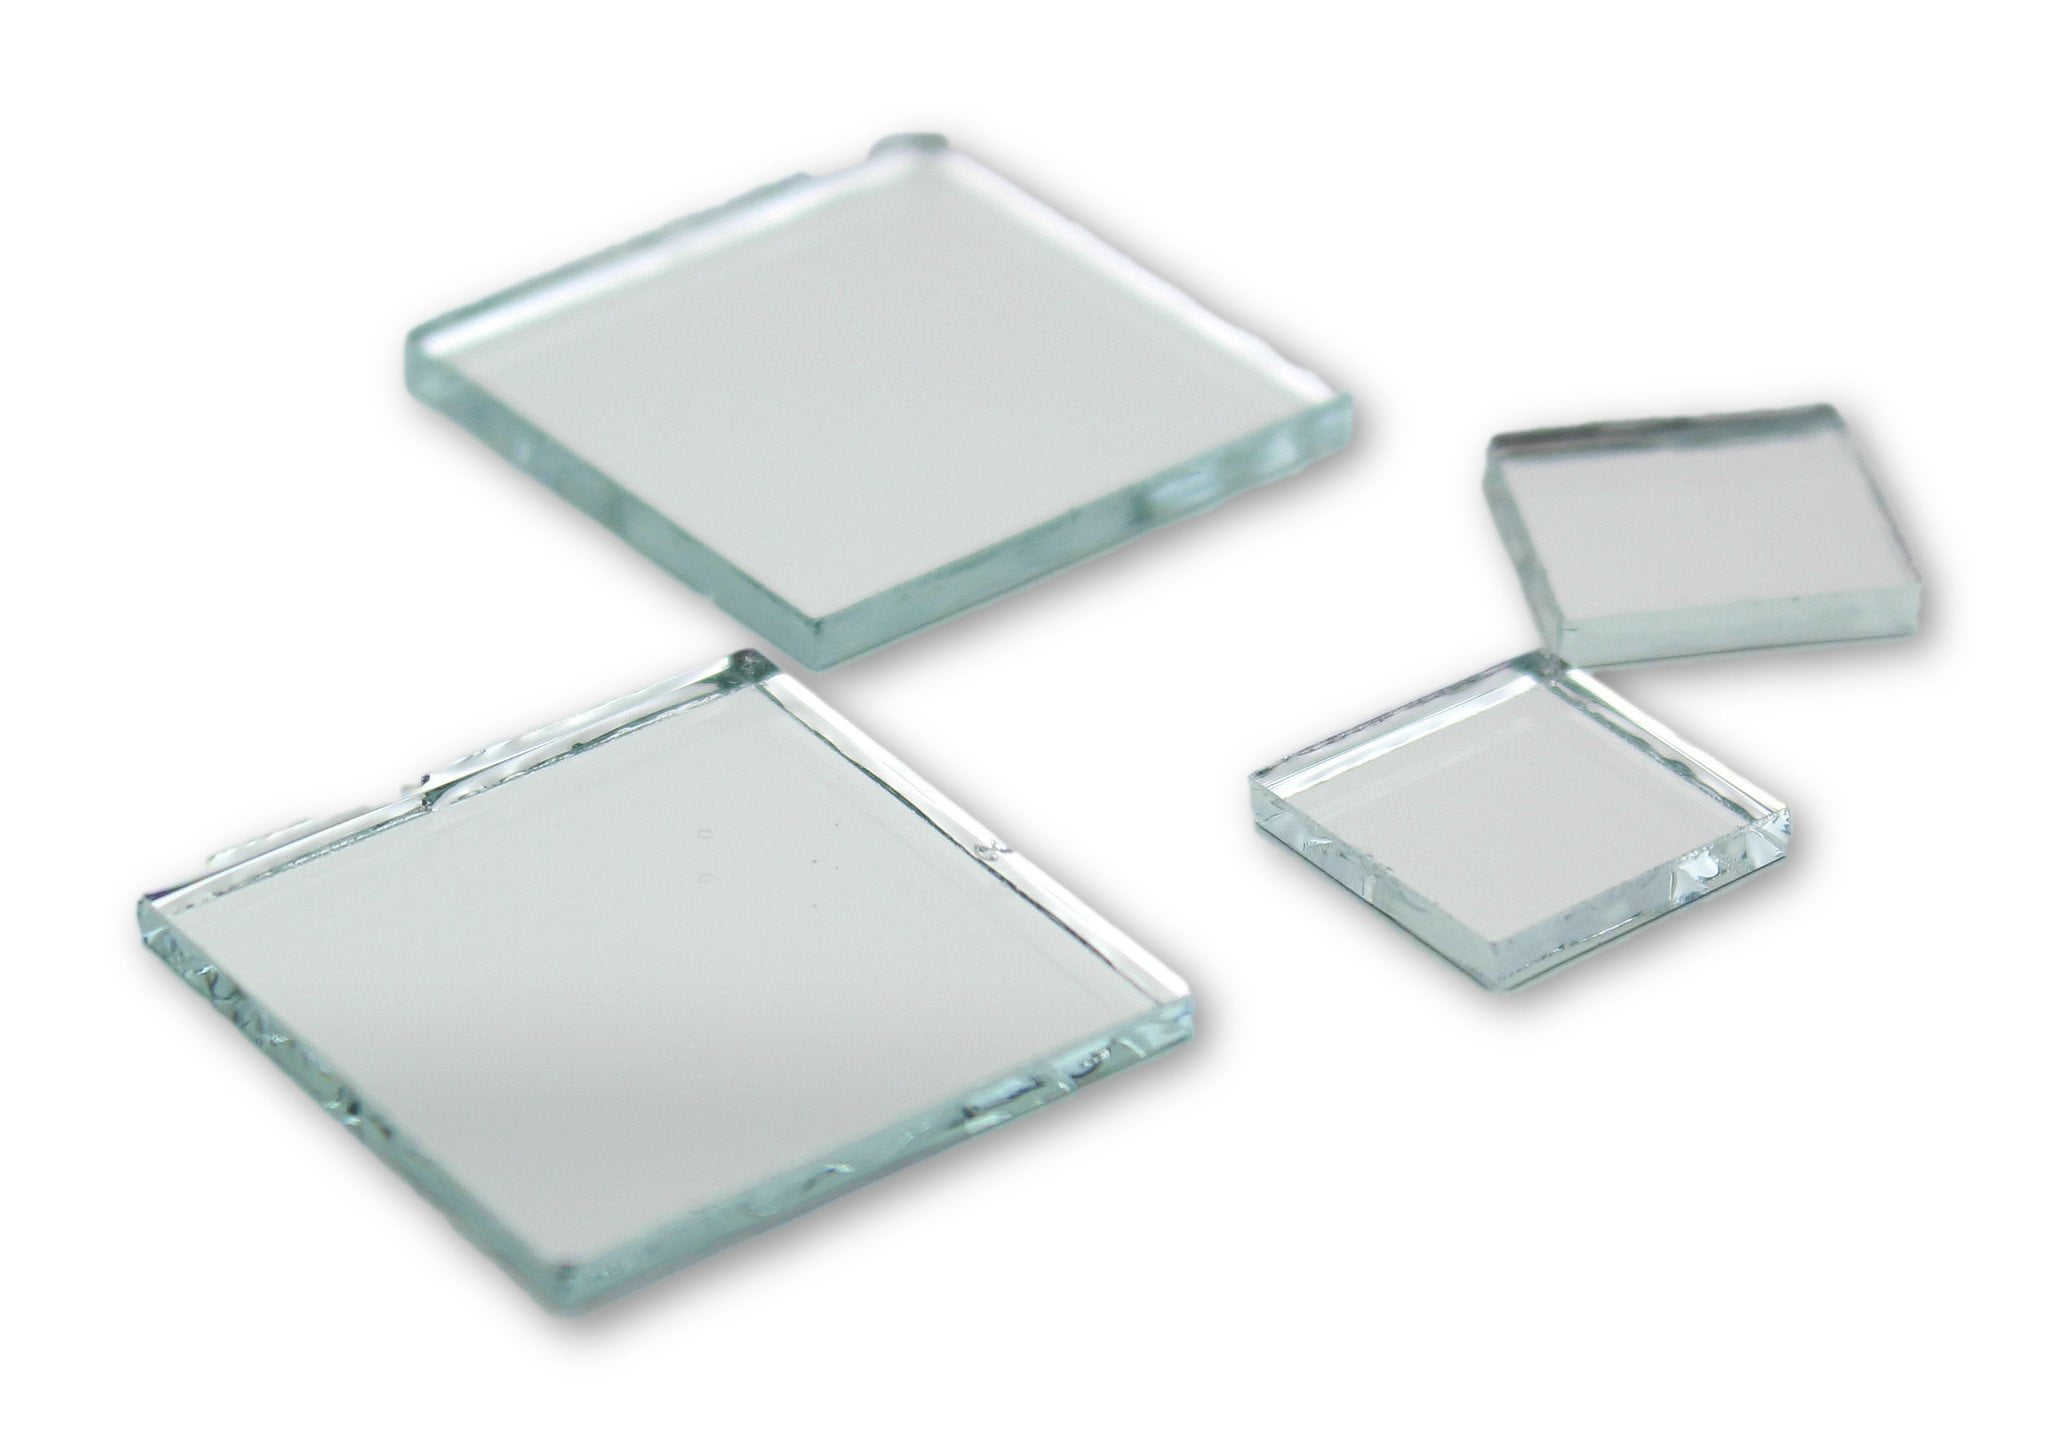 Small Mini Square & Round Craft Mirrors Assorted Sizes Mirror Mosaic Tiles 1/2-1 inch 100 Pieces, Size: 0.5 & 1